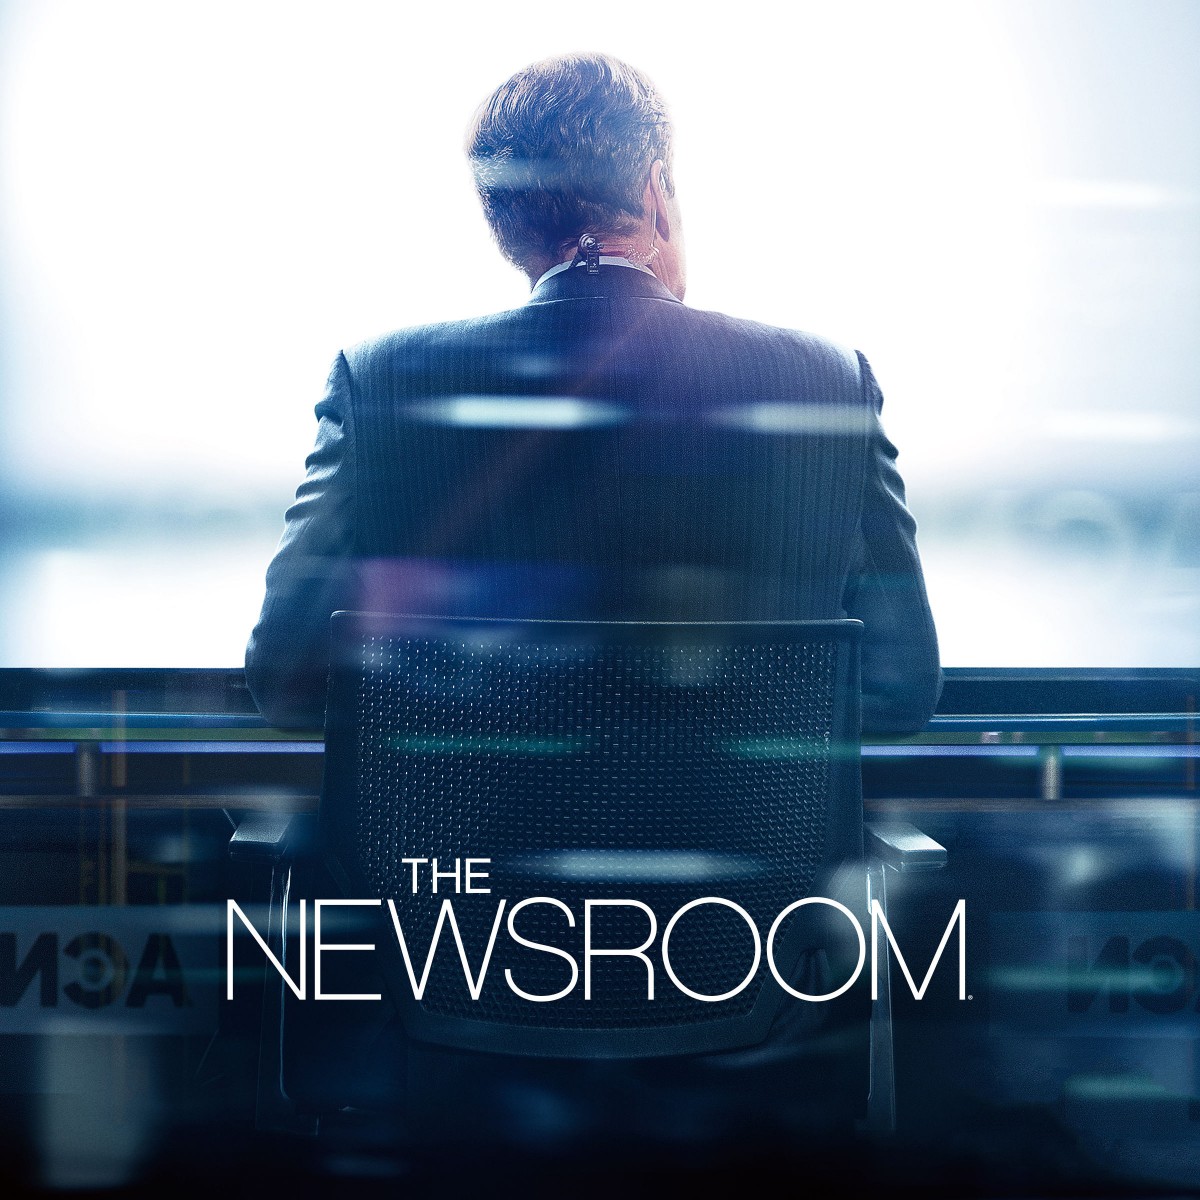 The Newsroom HBO Promos - Television Promos